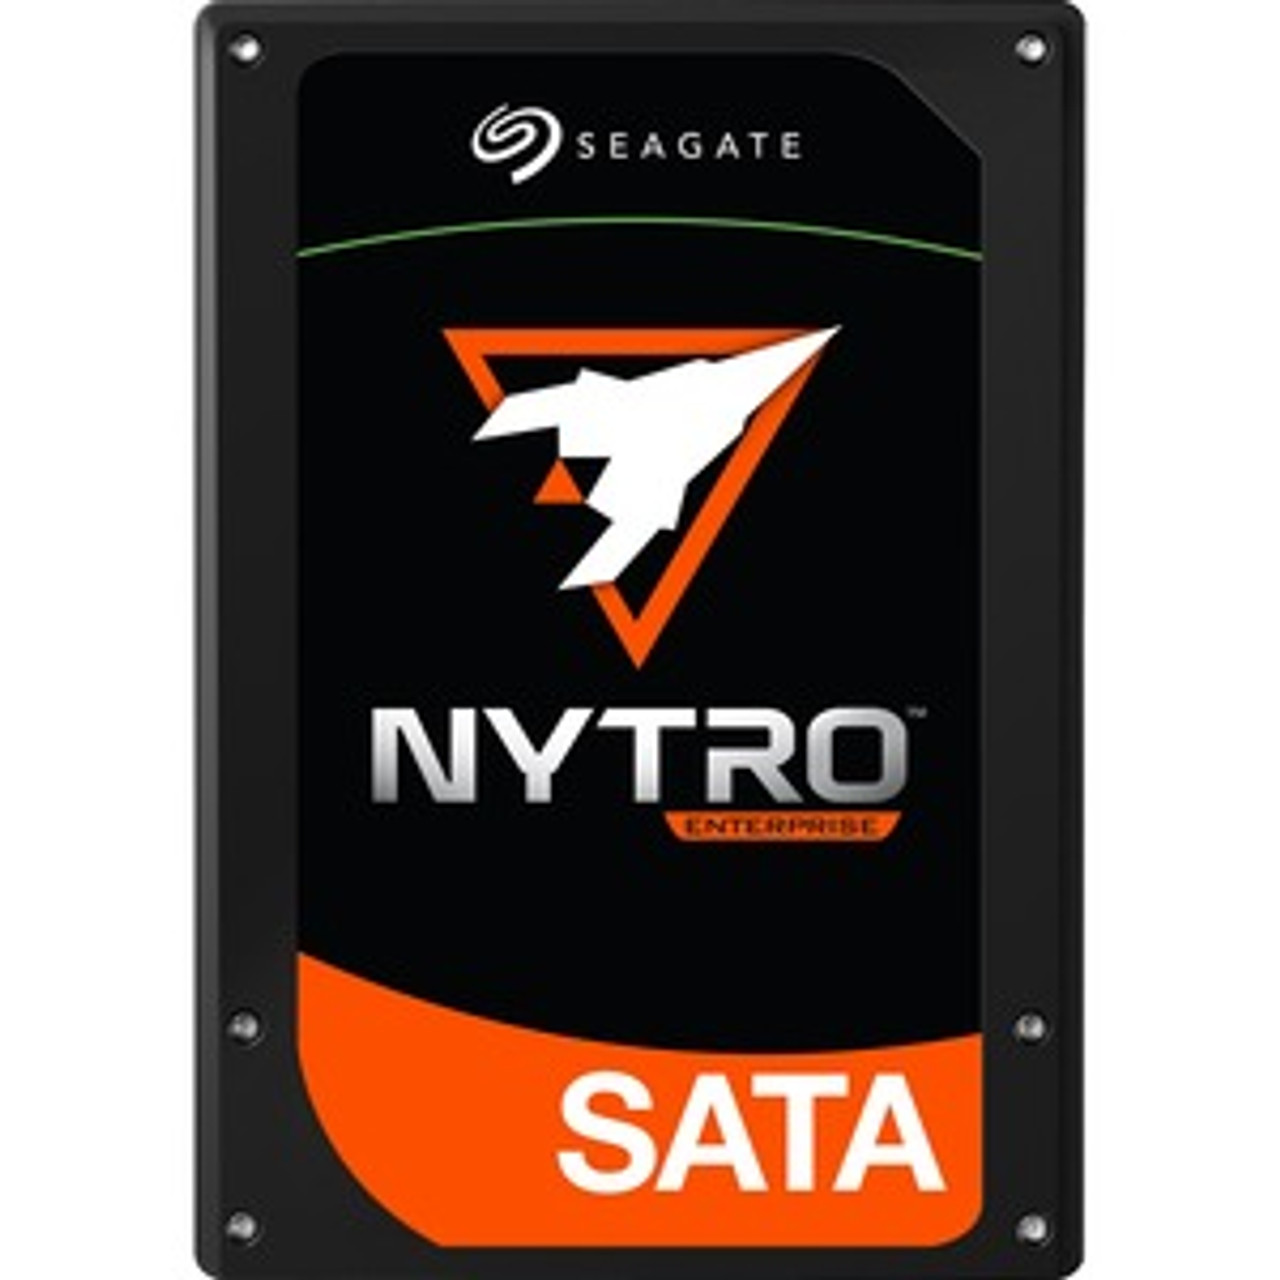 XS7680SE70113-5PK Seagate Nytro 3330 7.68TB eTLC SAS 12Gbps Scaled Endurance (SED) 2.5-inch Internal Solid State Drive (SSD) (5-Pack)